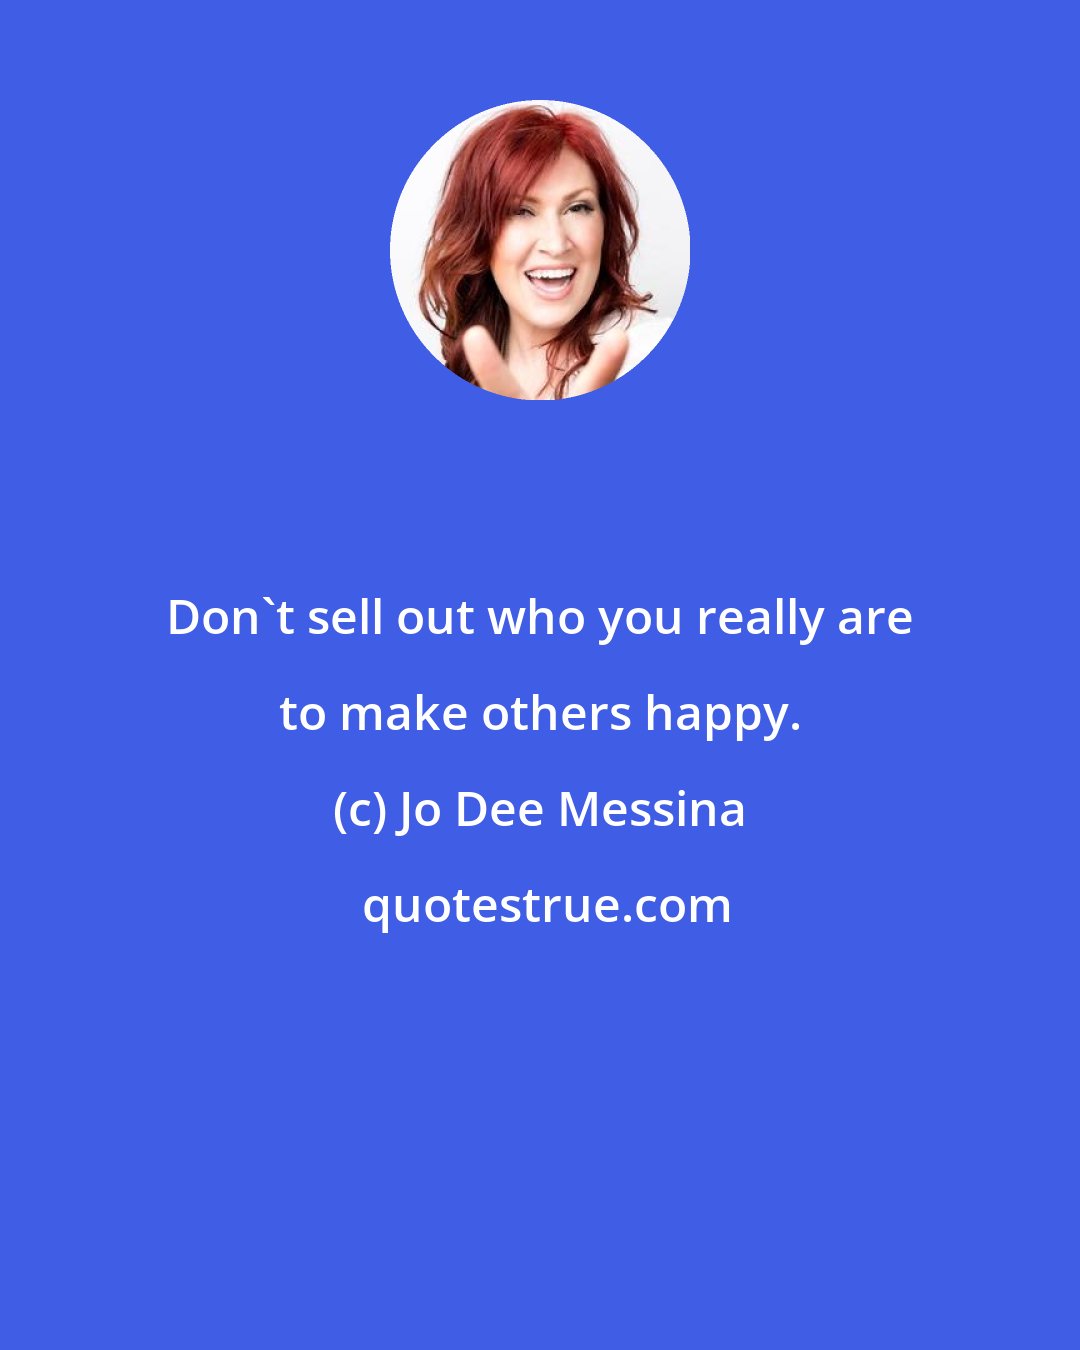 Jo Dee Messina: Don't sell out who you really are to make others happy.